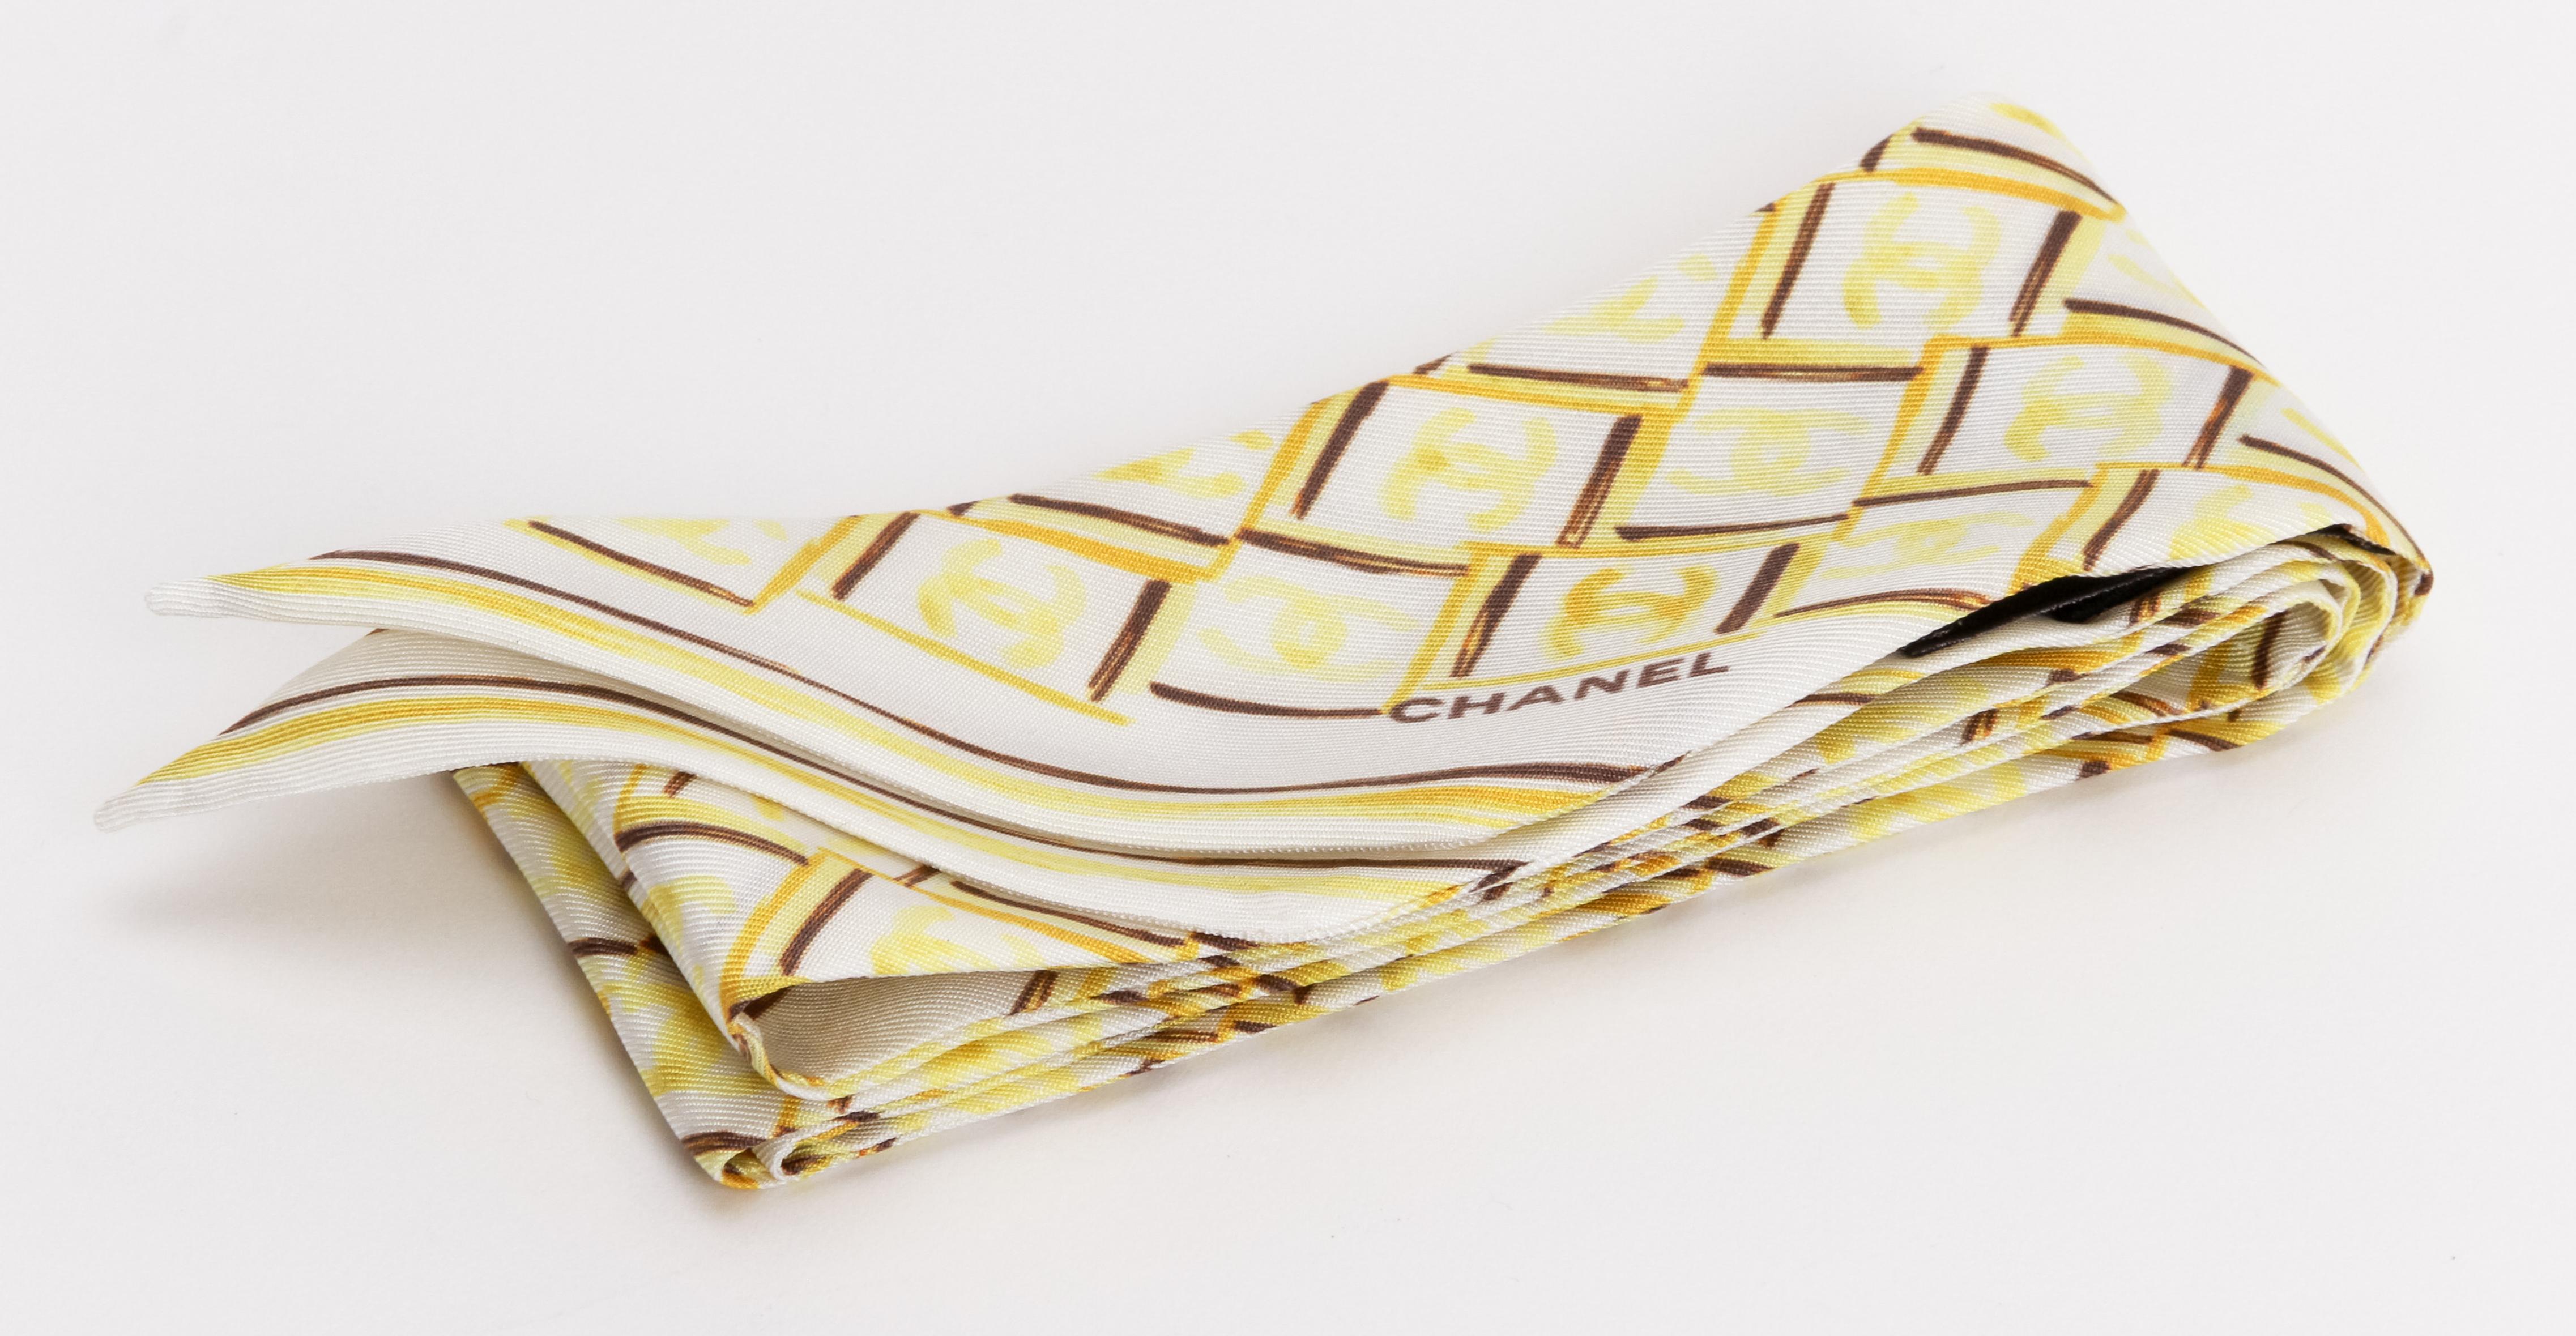 Chanel brand new 100% silk twilly scarf. Geometric design. White, yellow and brown. Care tag attached.